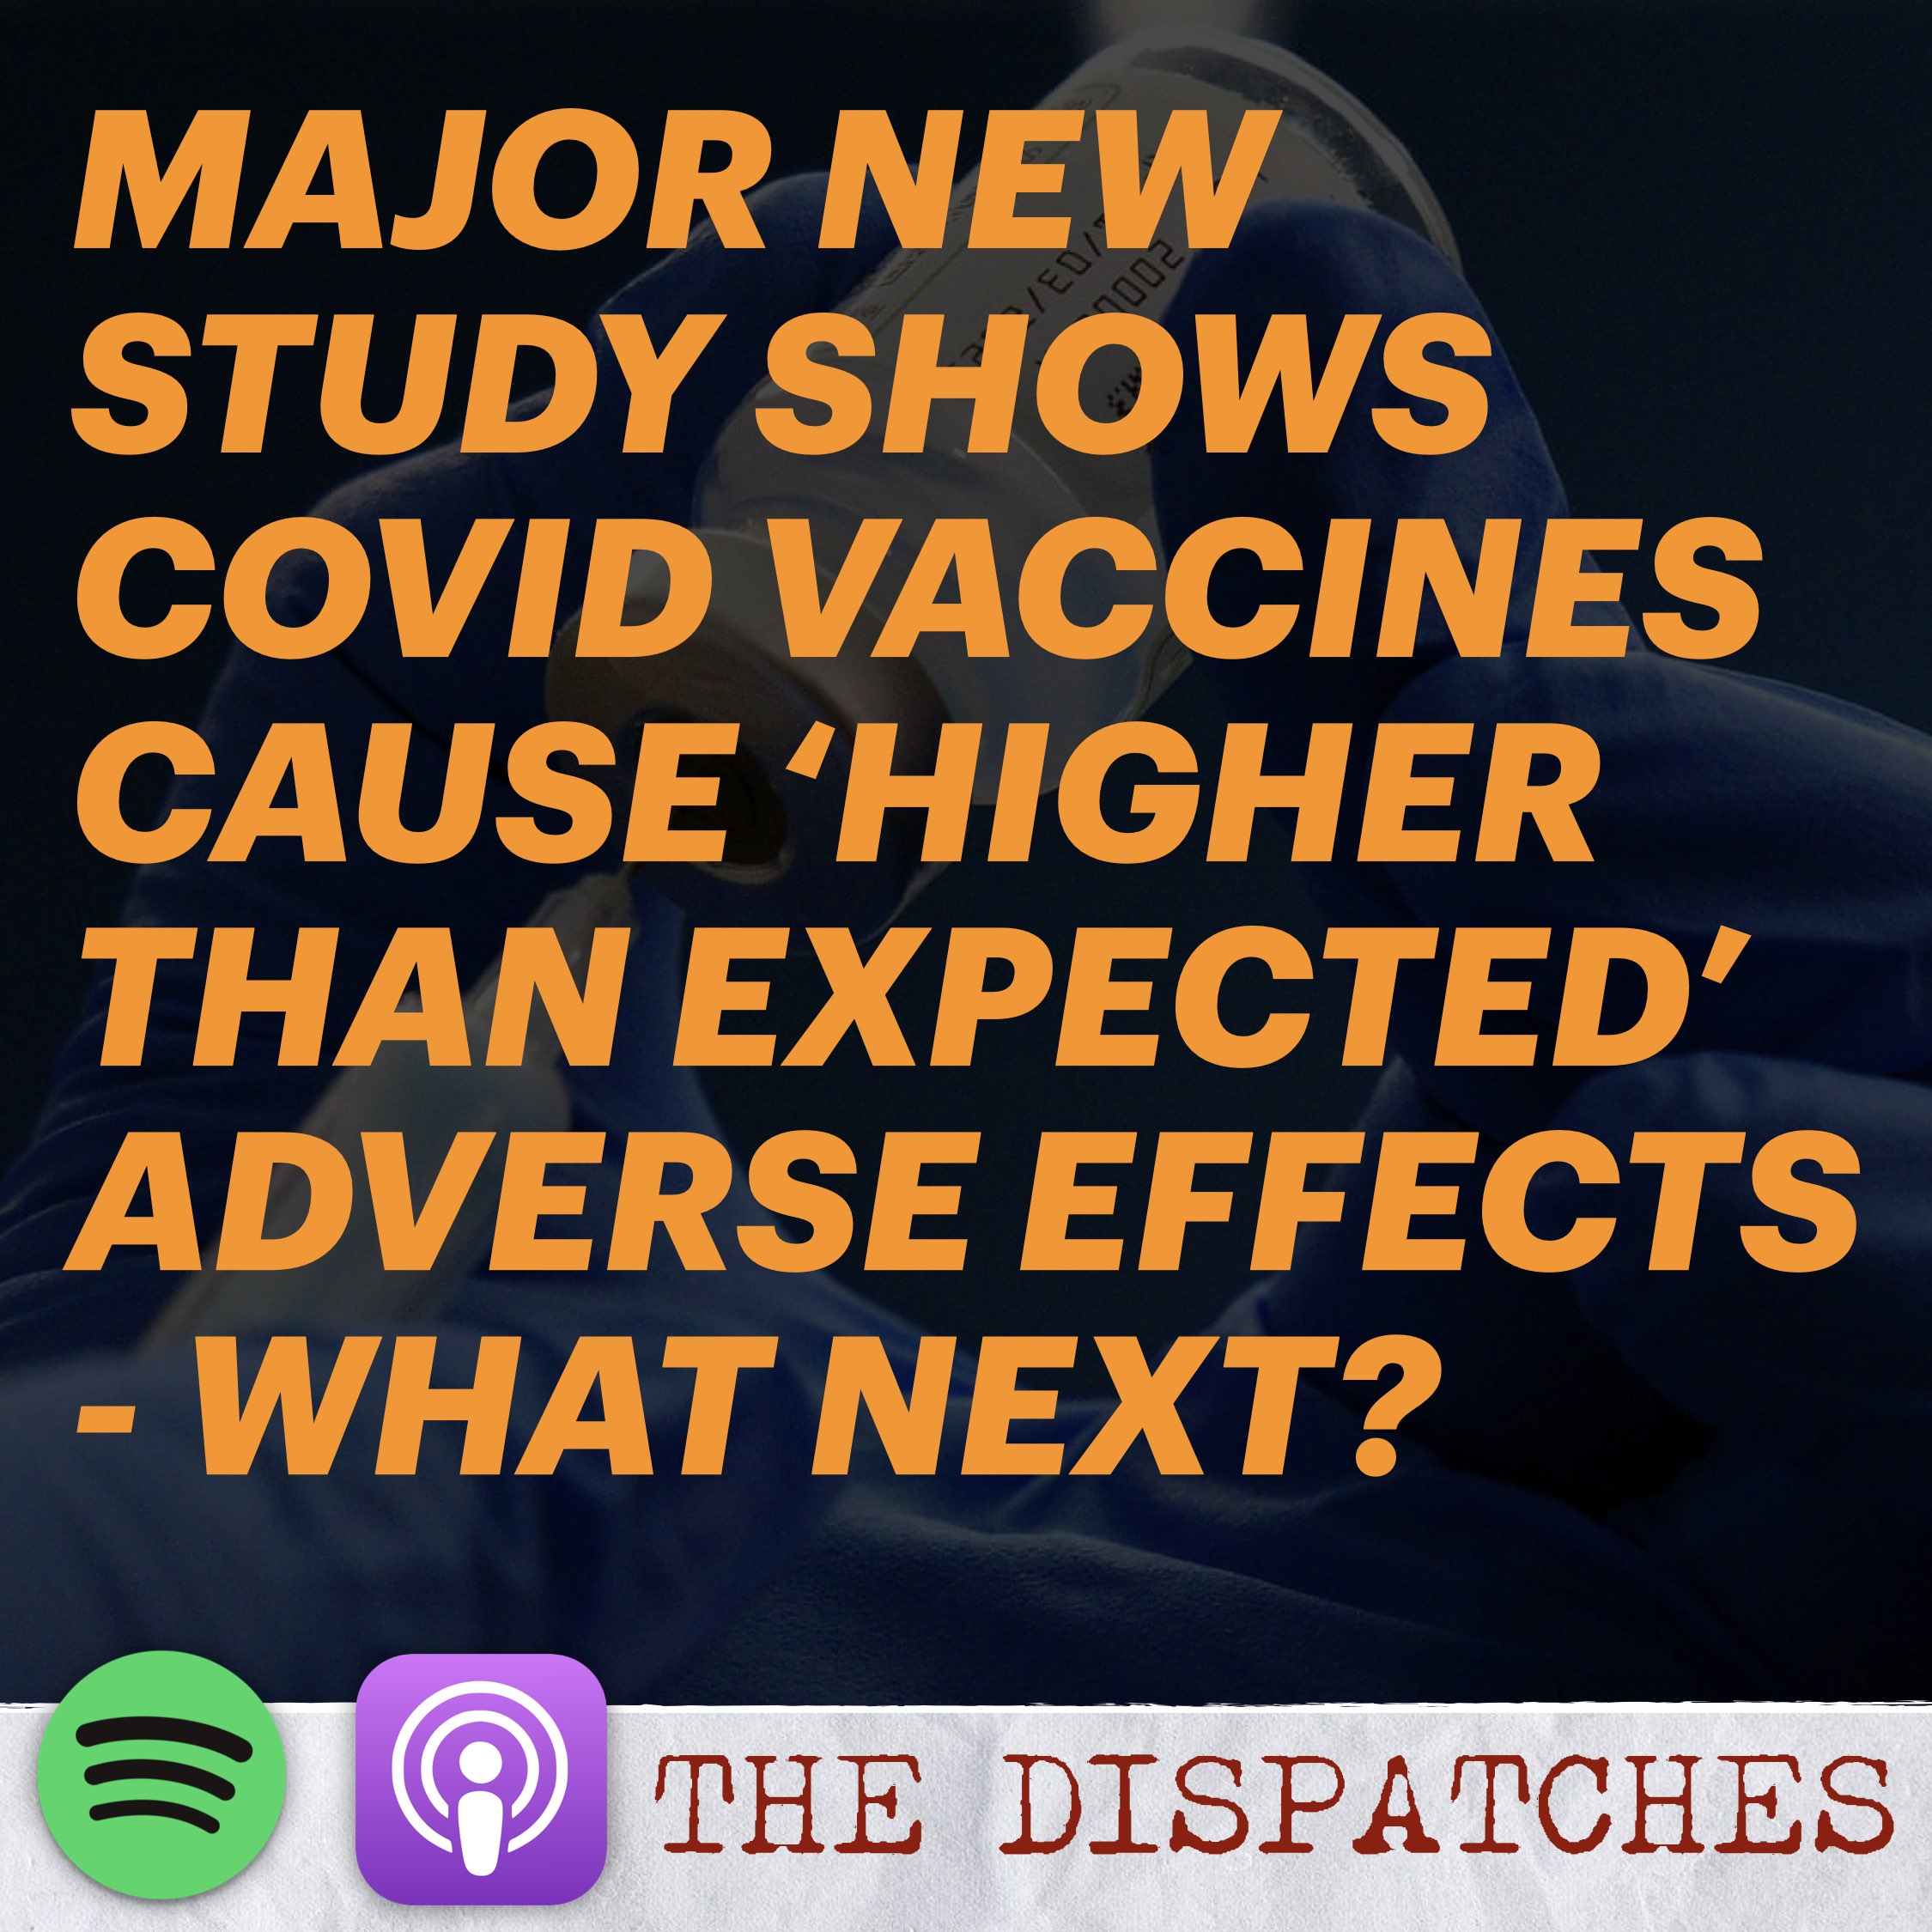 New Study Shows COVID Vaccines Cause Higher Than Expected Adverse Effects - What Next?